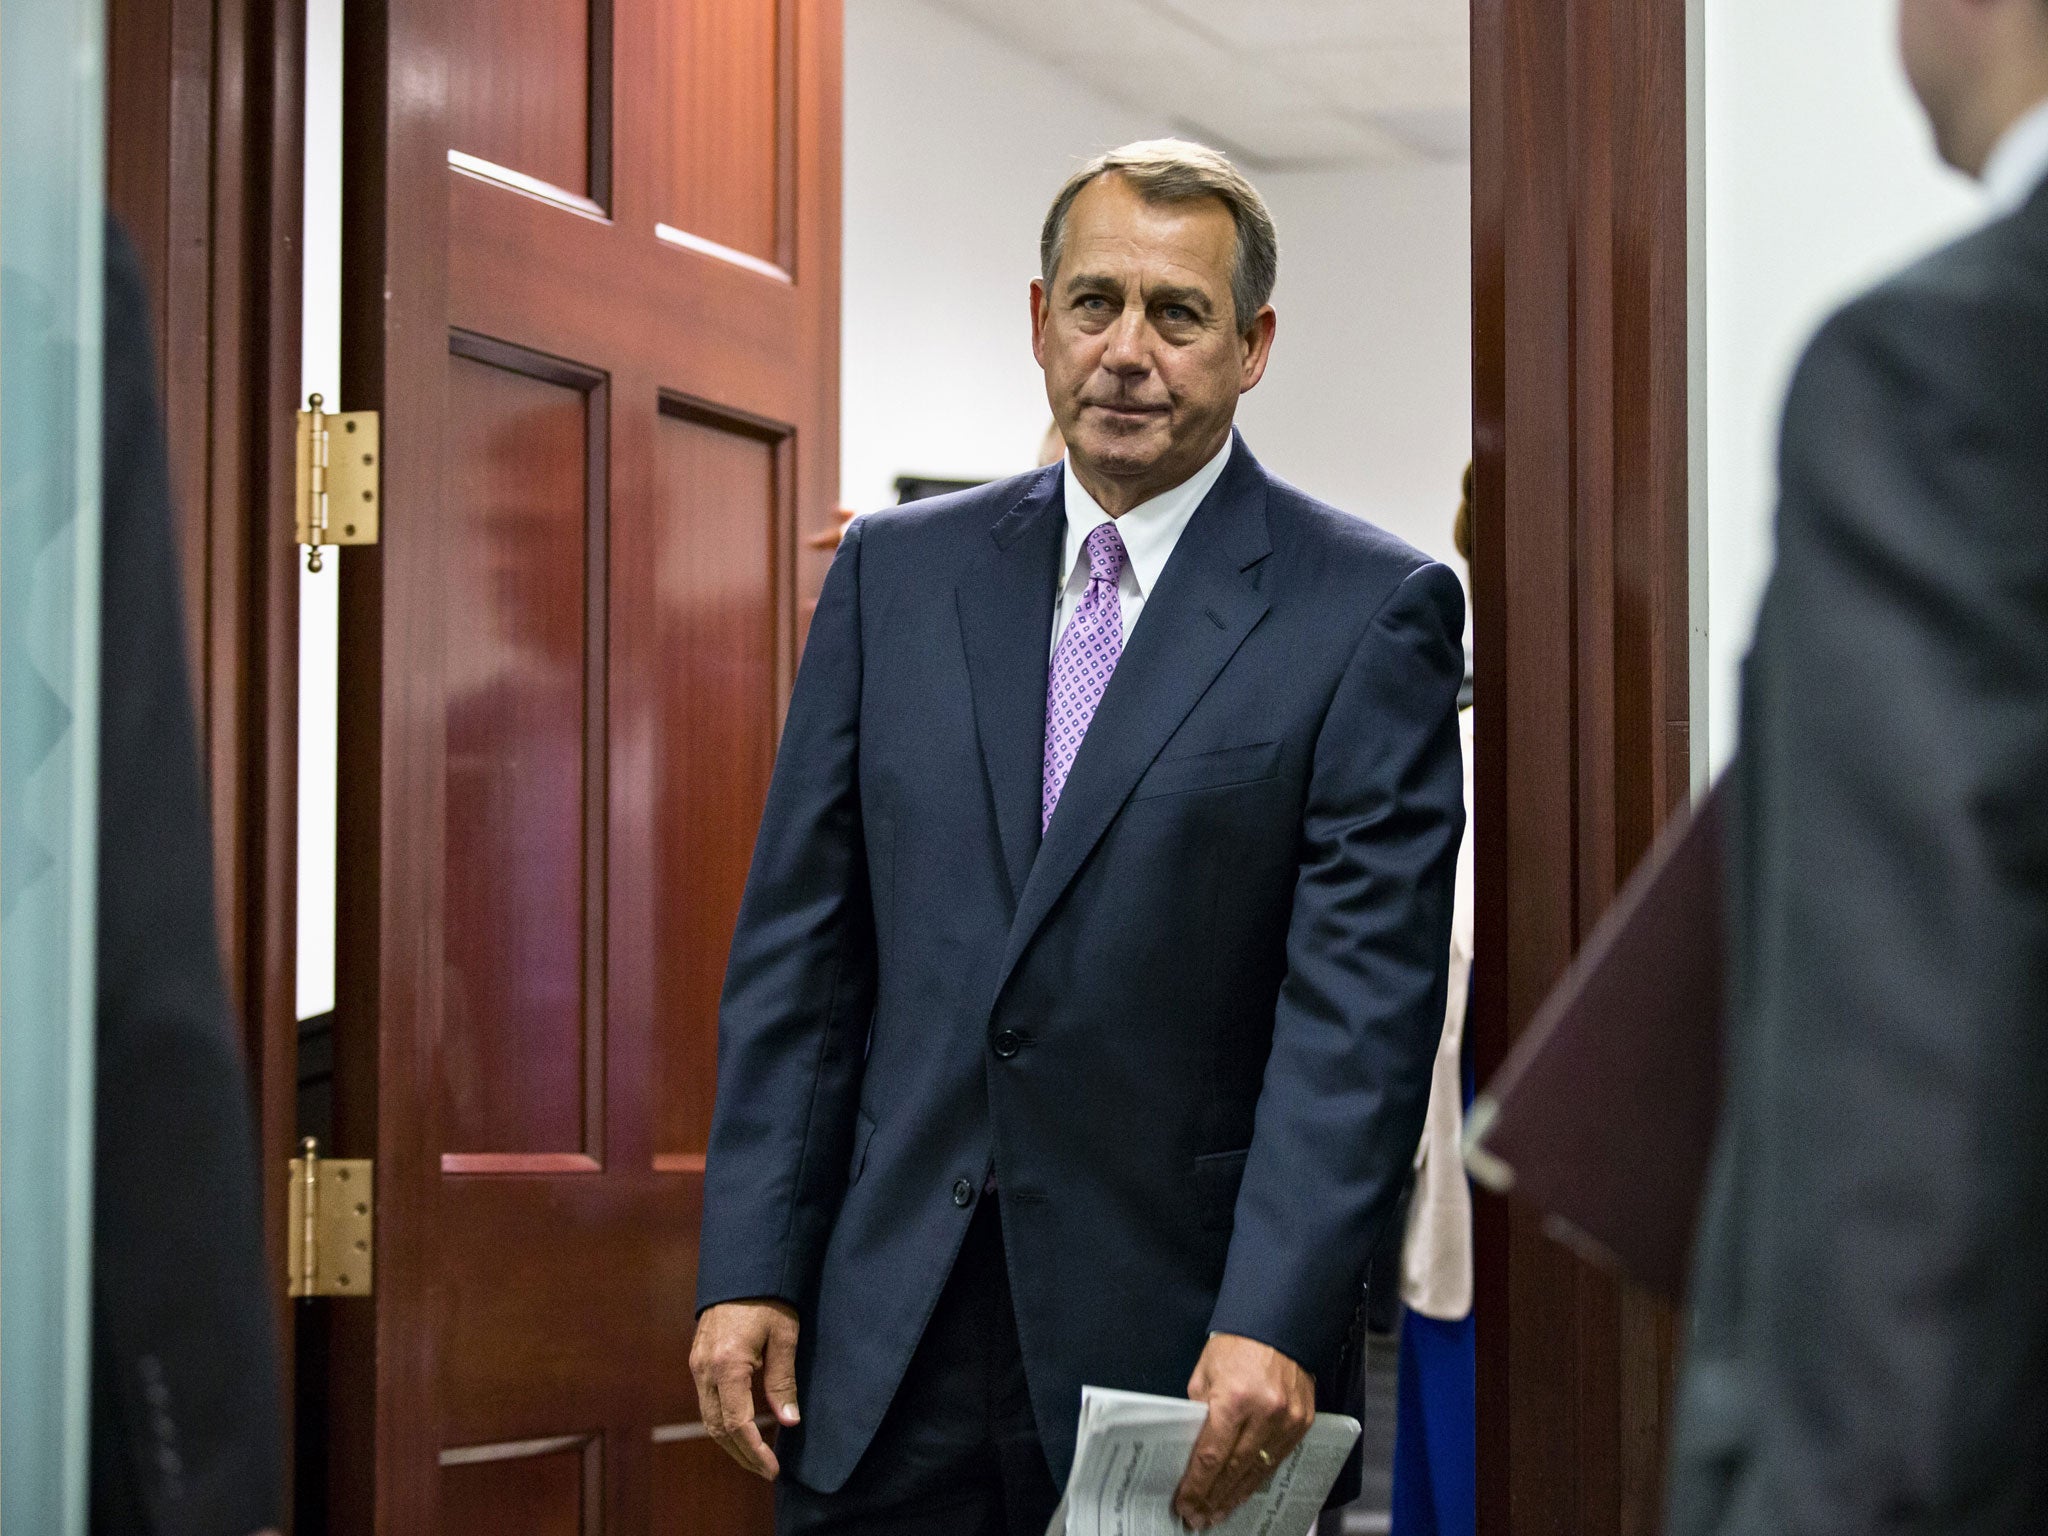 John Boehner: The Republican House Speaker is expected to seek a deal on the debt ceiling